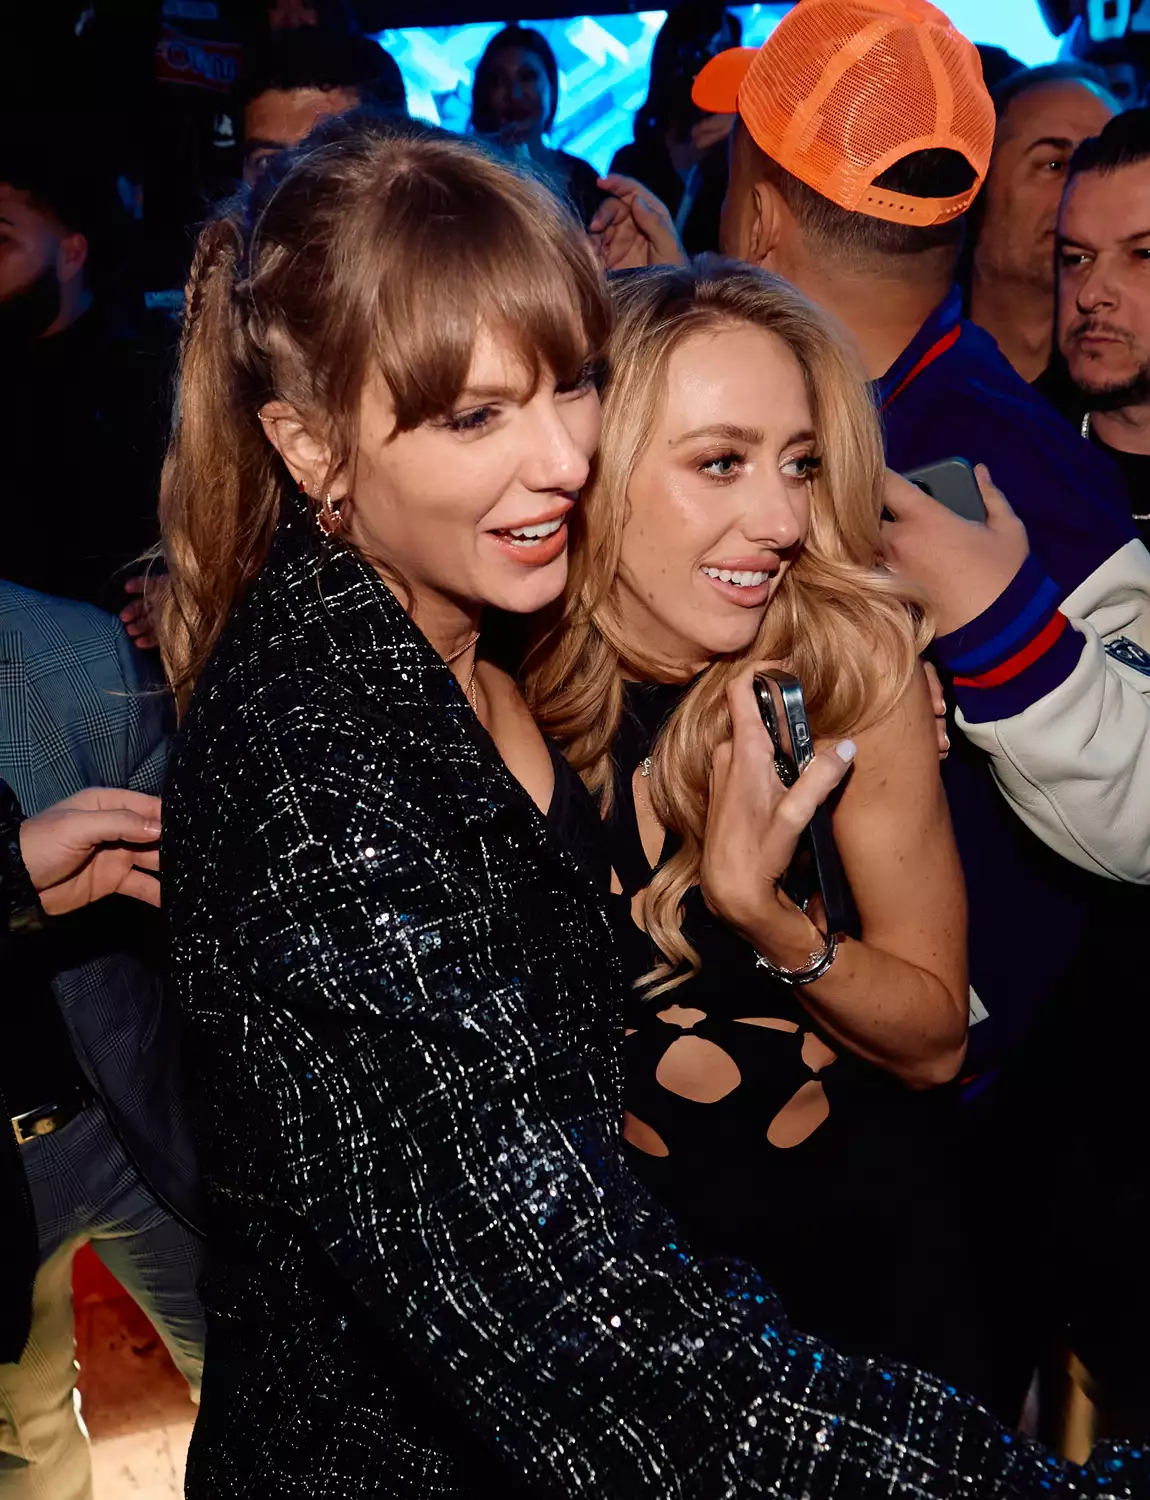 Taylor Swift and Brittany Mahomes Share Friendly Embrace at XS Nightclub inside Wynn Las Vegas on Feb. 11